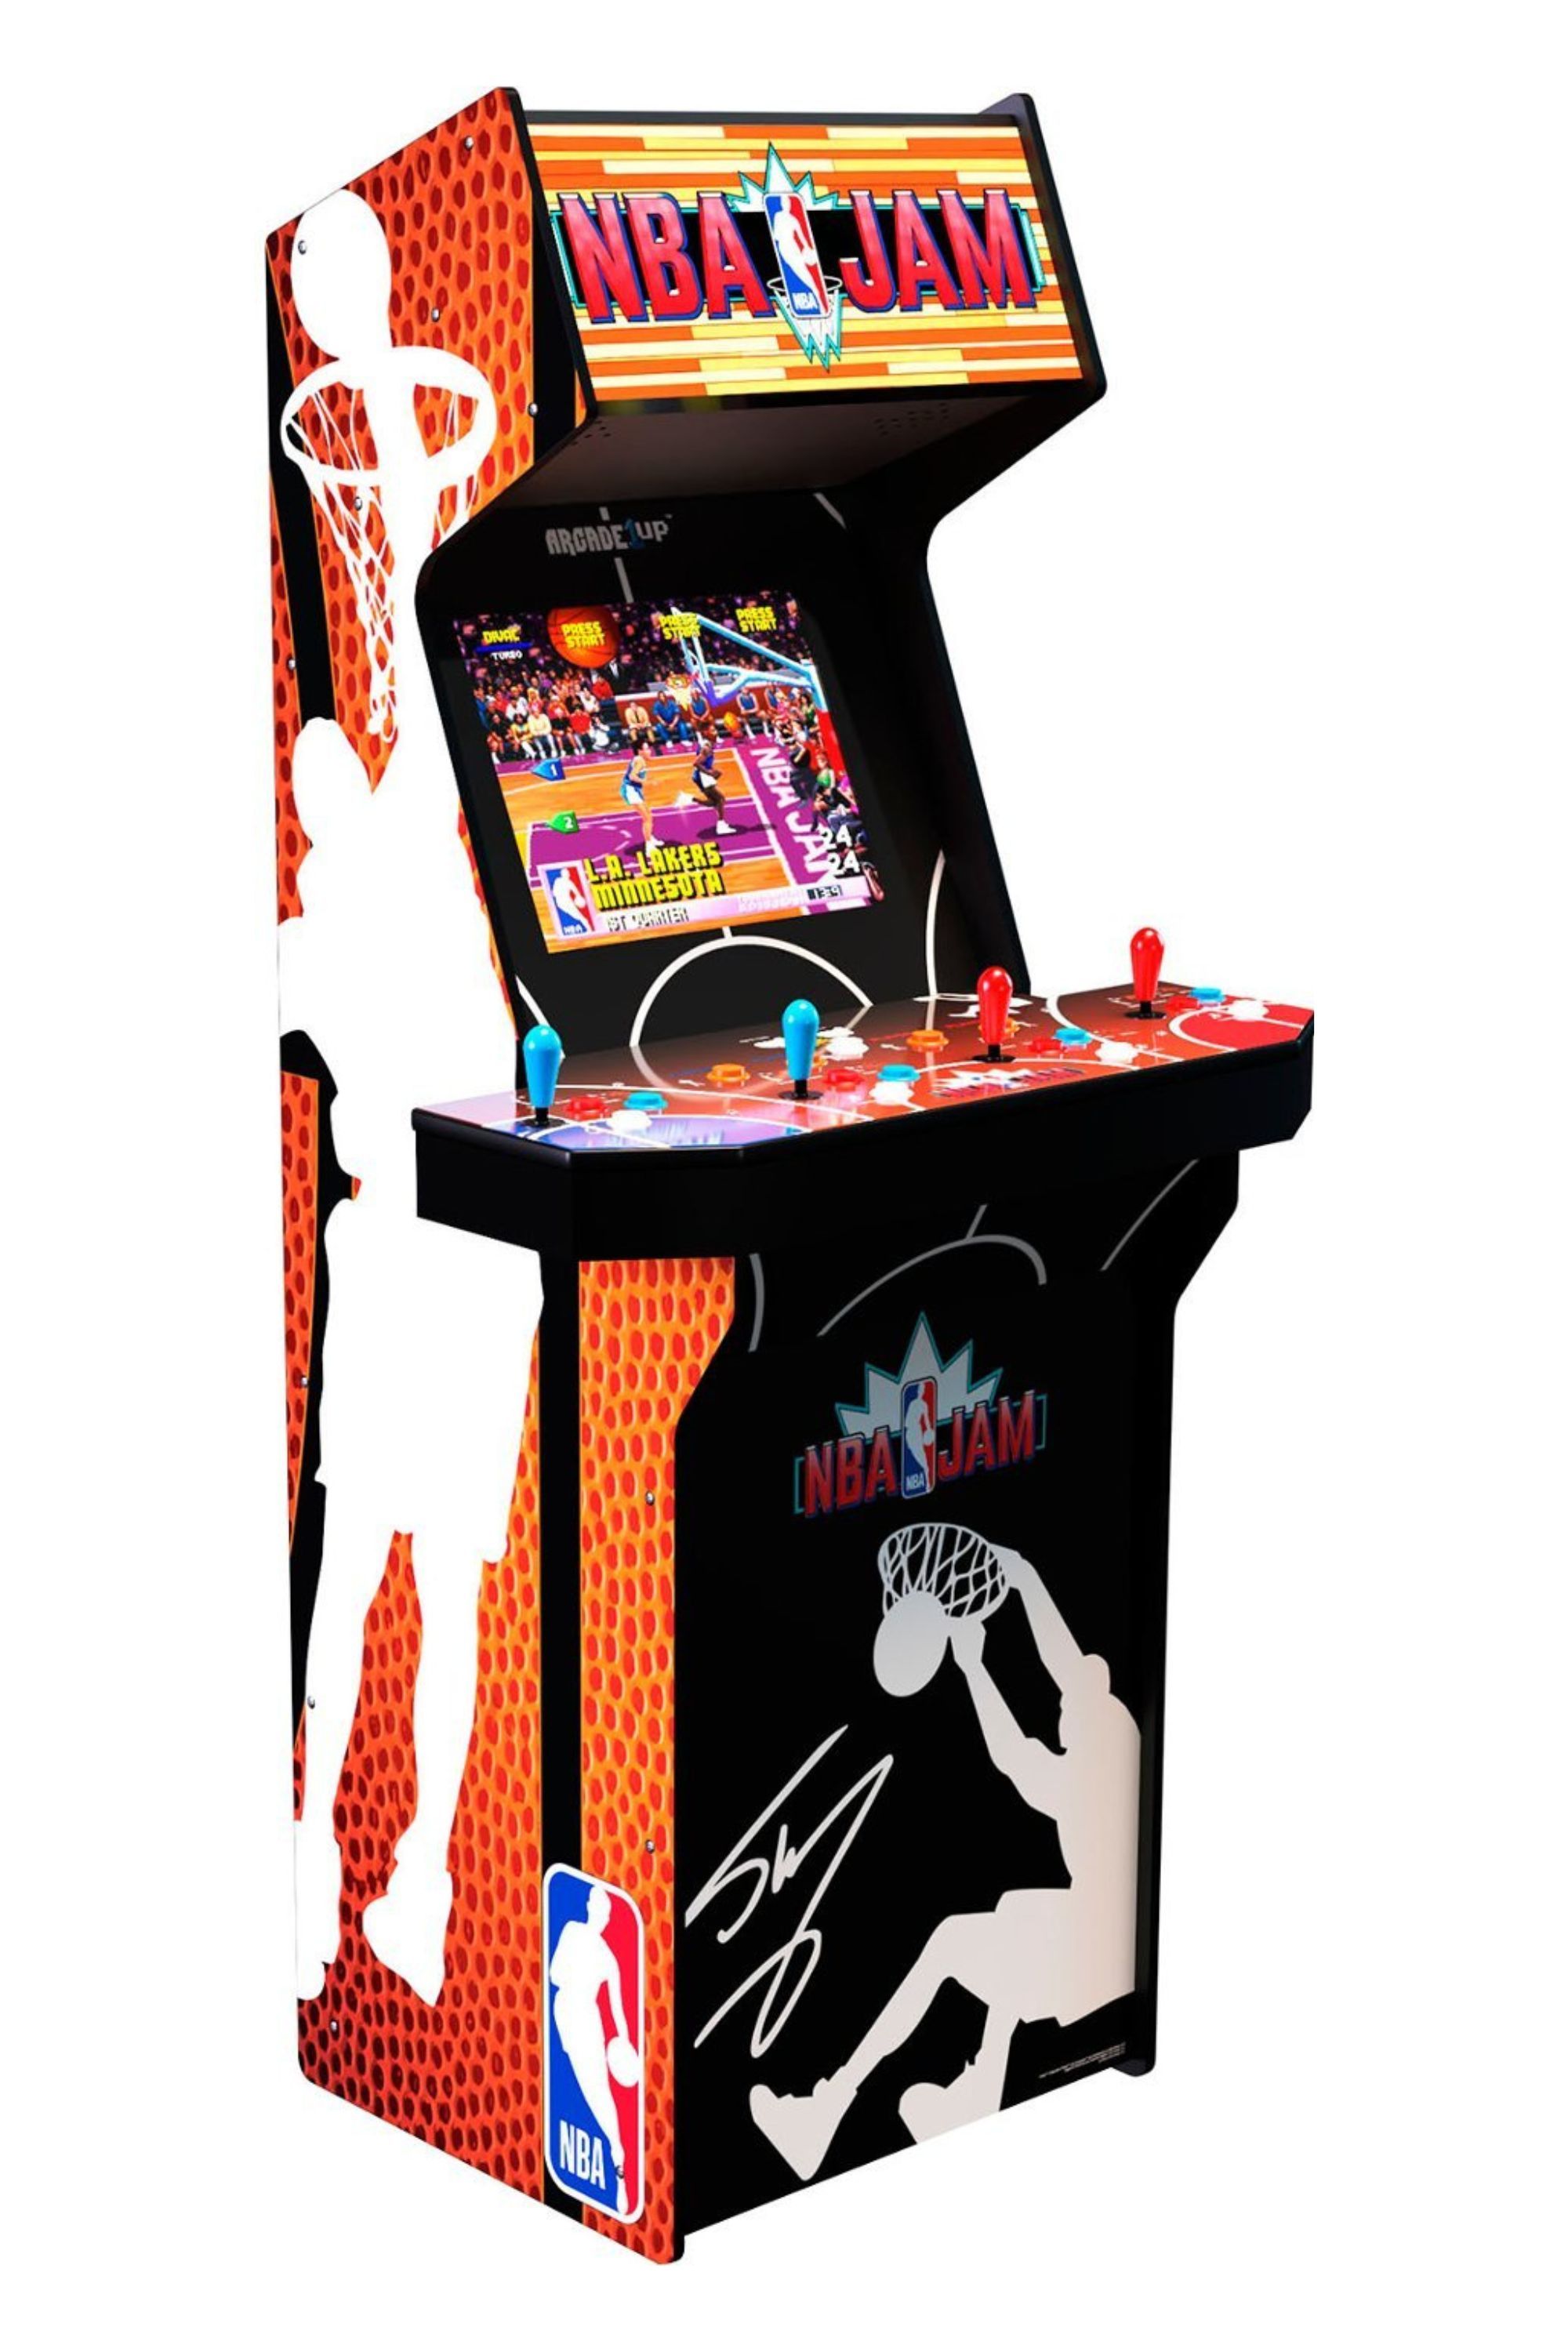 Product still of the Arcade1Up NBA Jam SHAQ Edition Gaming Cabinet